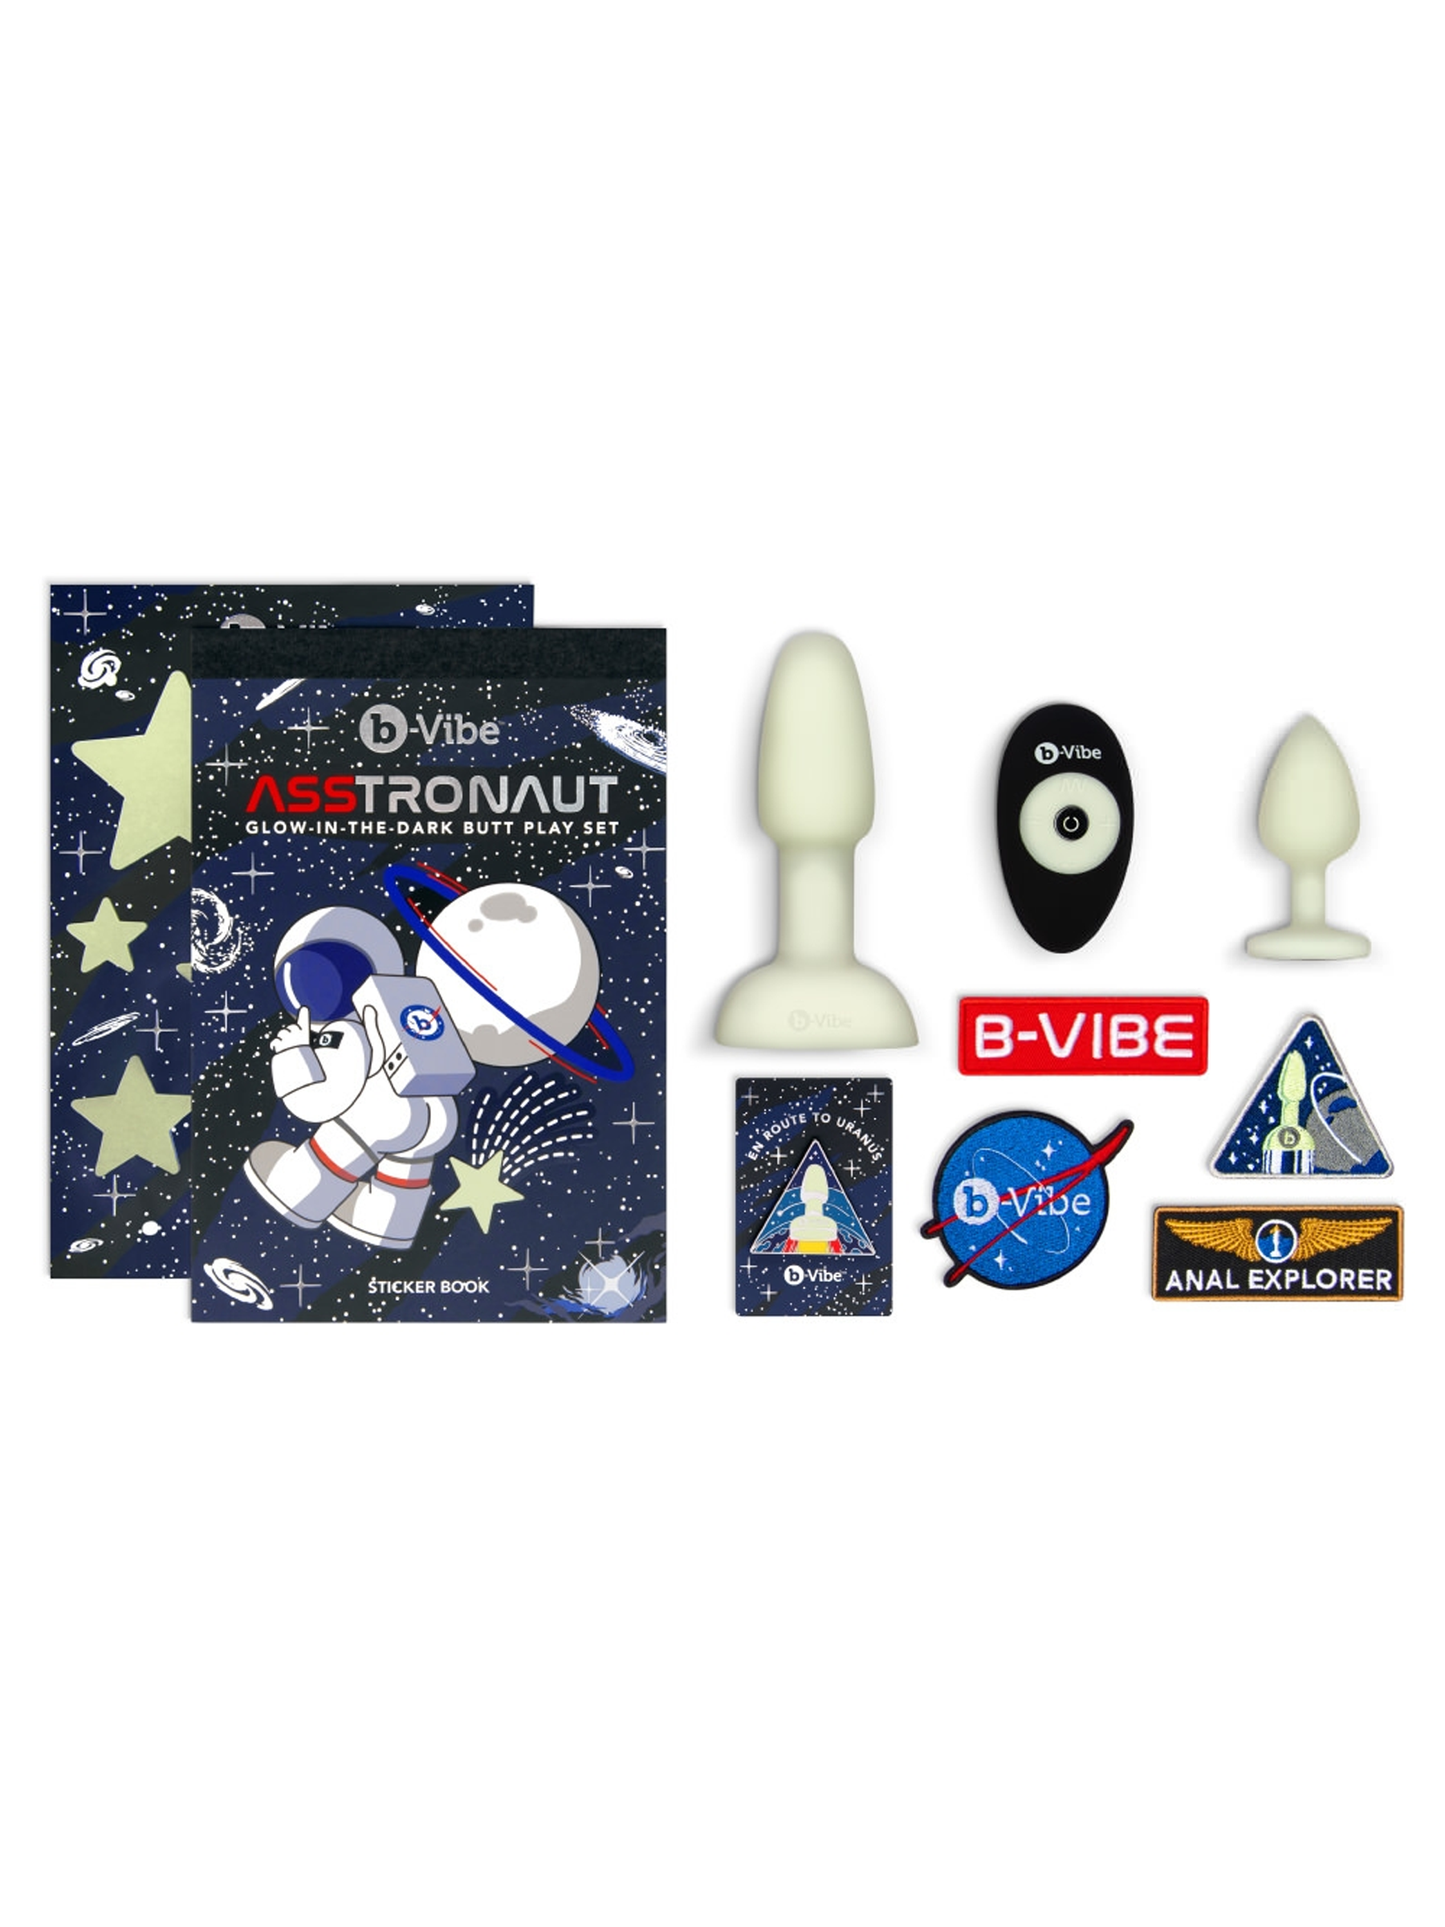 B-Vibe Asstronaut Glowing Butt Play Set complete contents